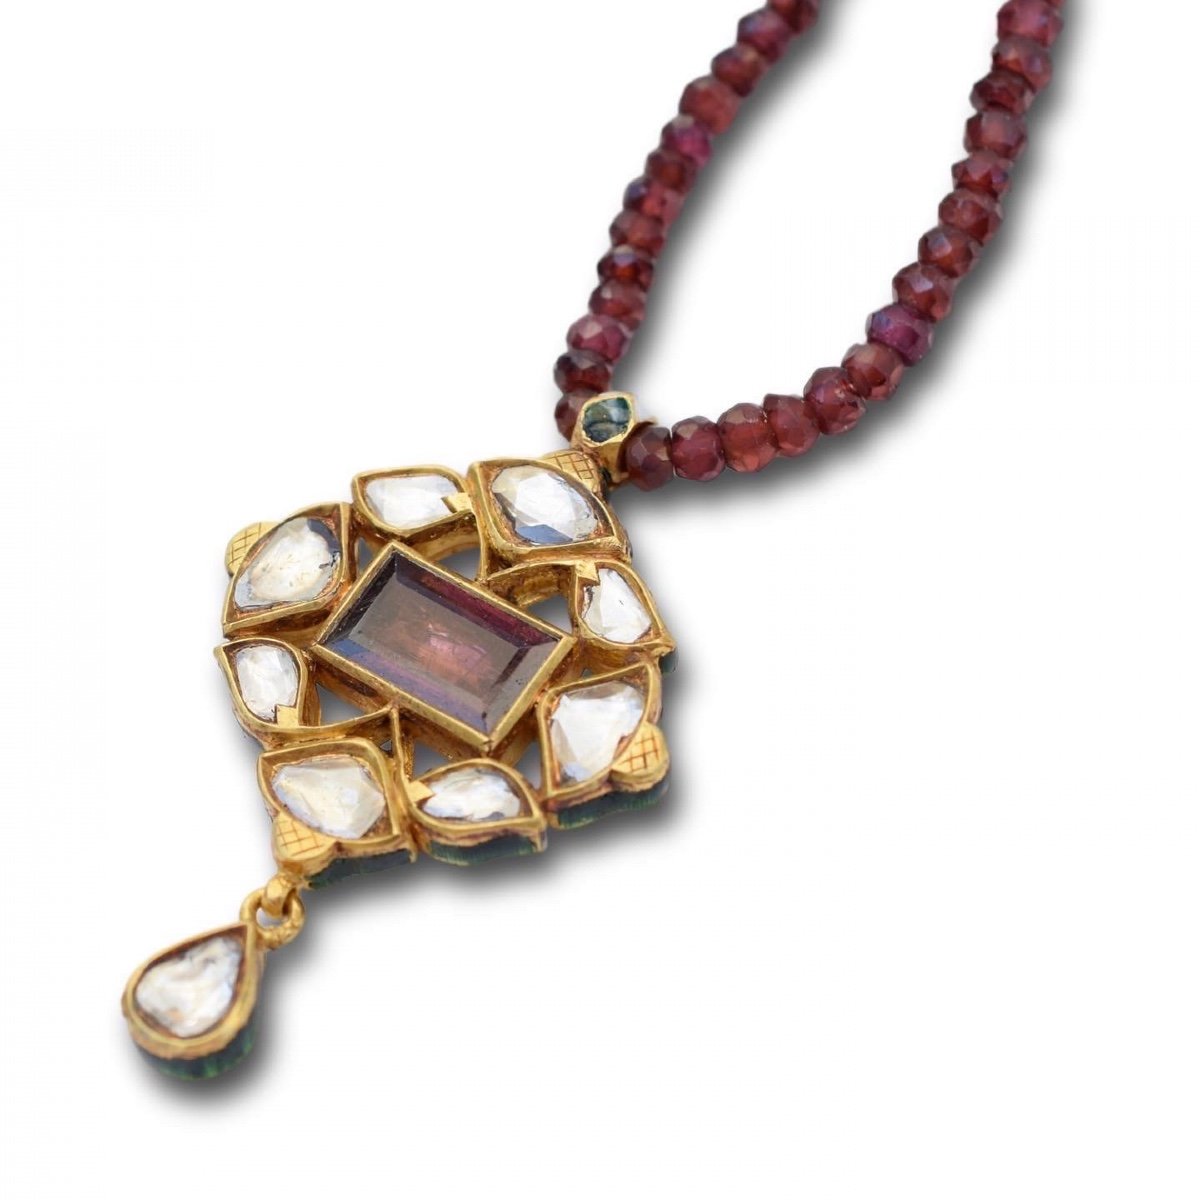 Enamel And Gold Pendant With Diamonds And A Table Cut Garnet. Indian, Circa 1900-photo-6